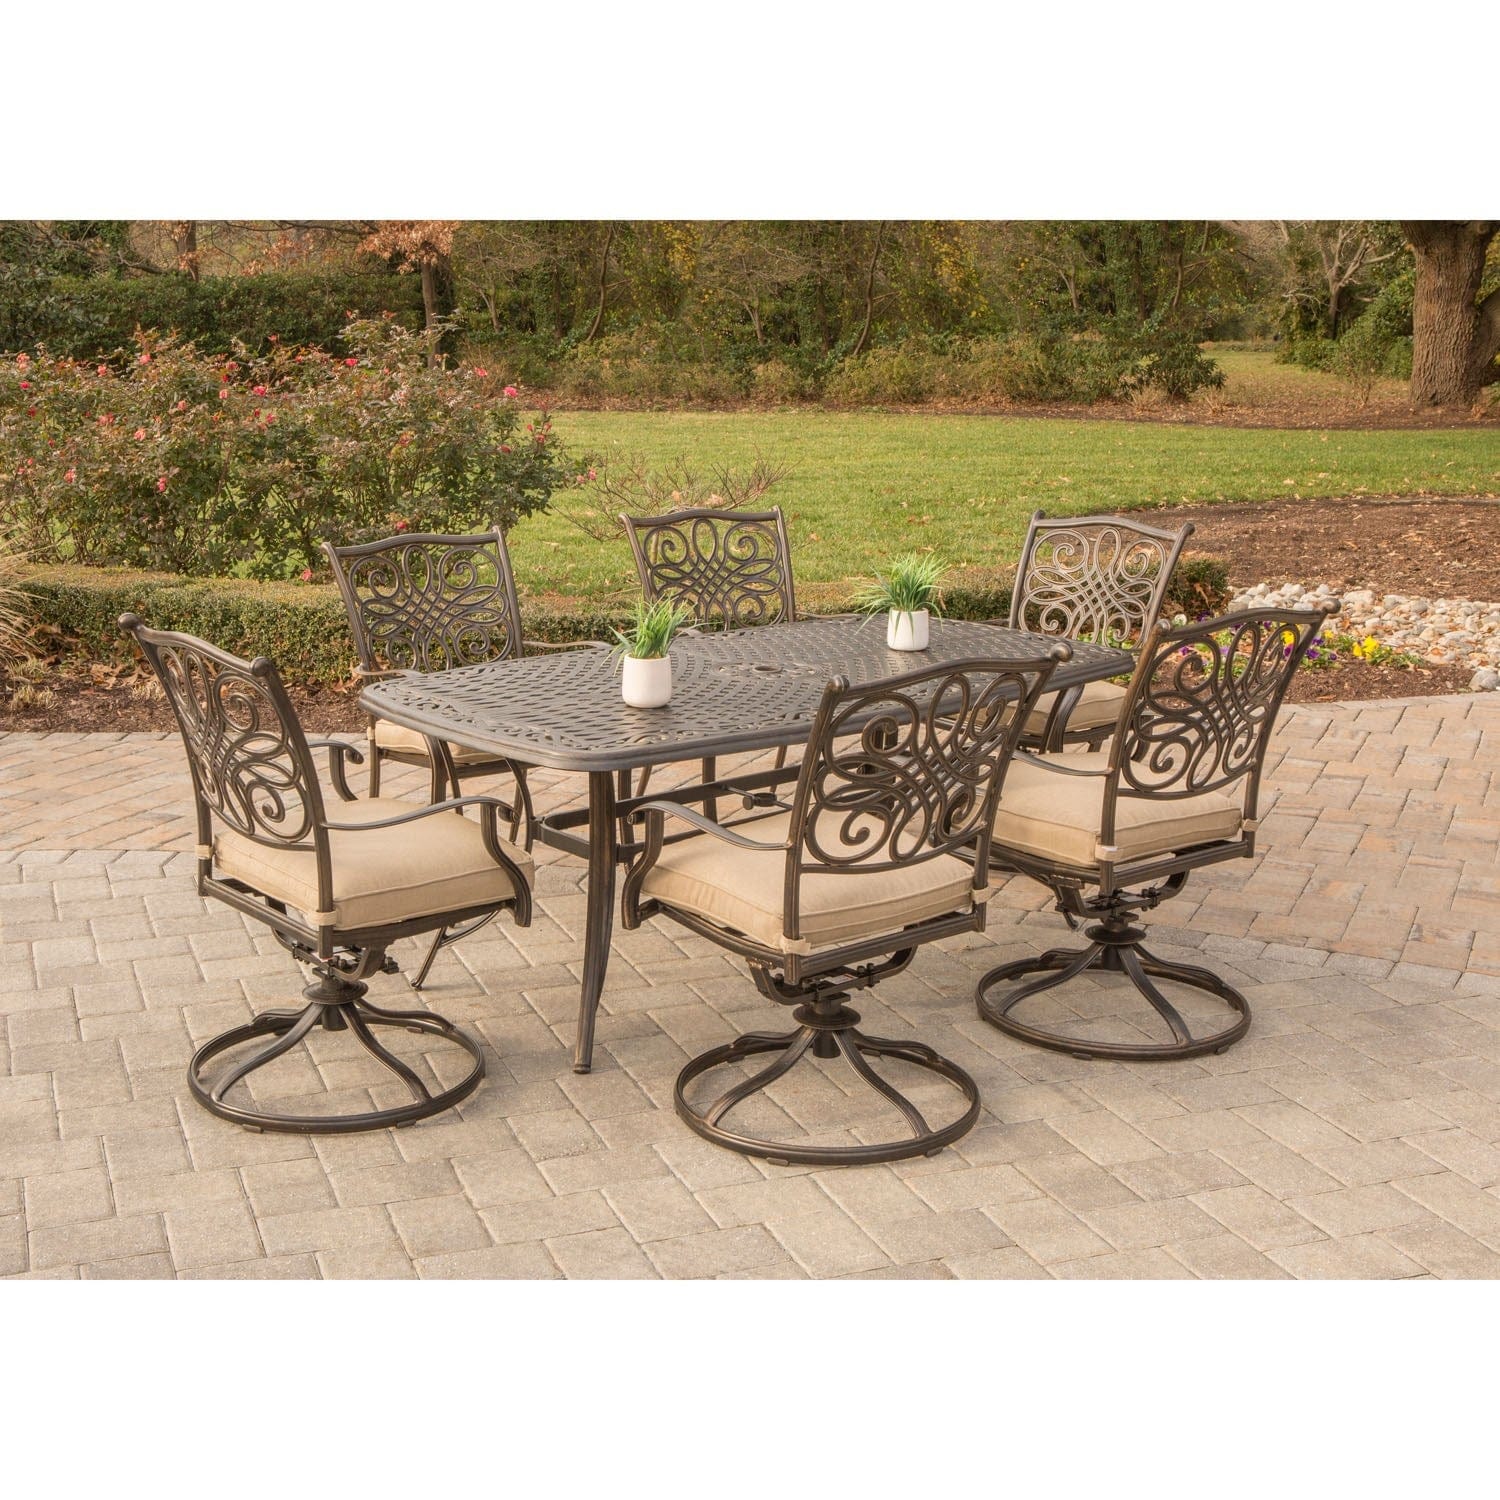 Hanover Outdoor Dining Set Hanover - Traditions 7-Piece Aluminum Frame Dining Set with Six Swivel Dining Chairs and a Large 72 x 38 in. Dining Table | TRADITIONS7PCSW-6